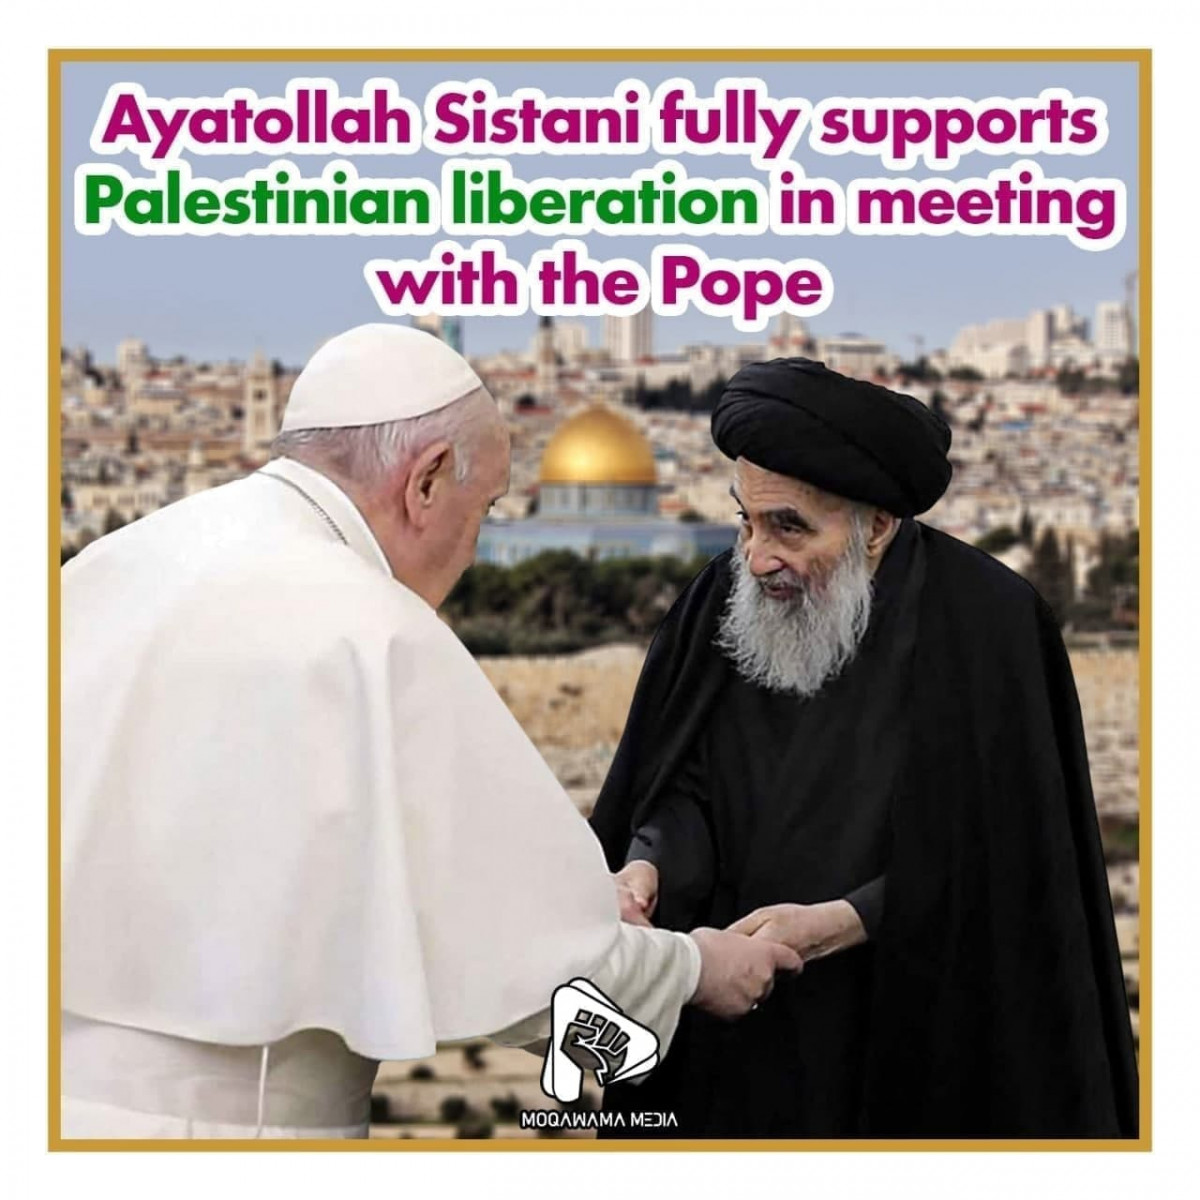 Ayatollah Sistani fully supports Palestinian liberation in meeting with the Pope